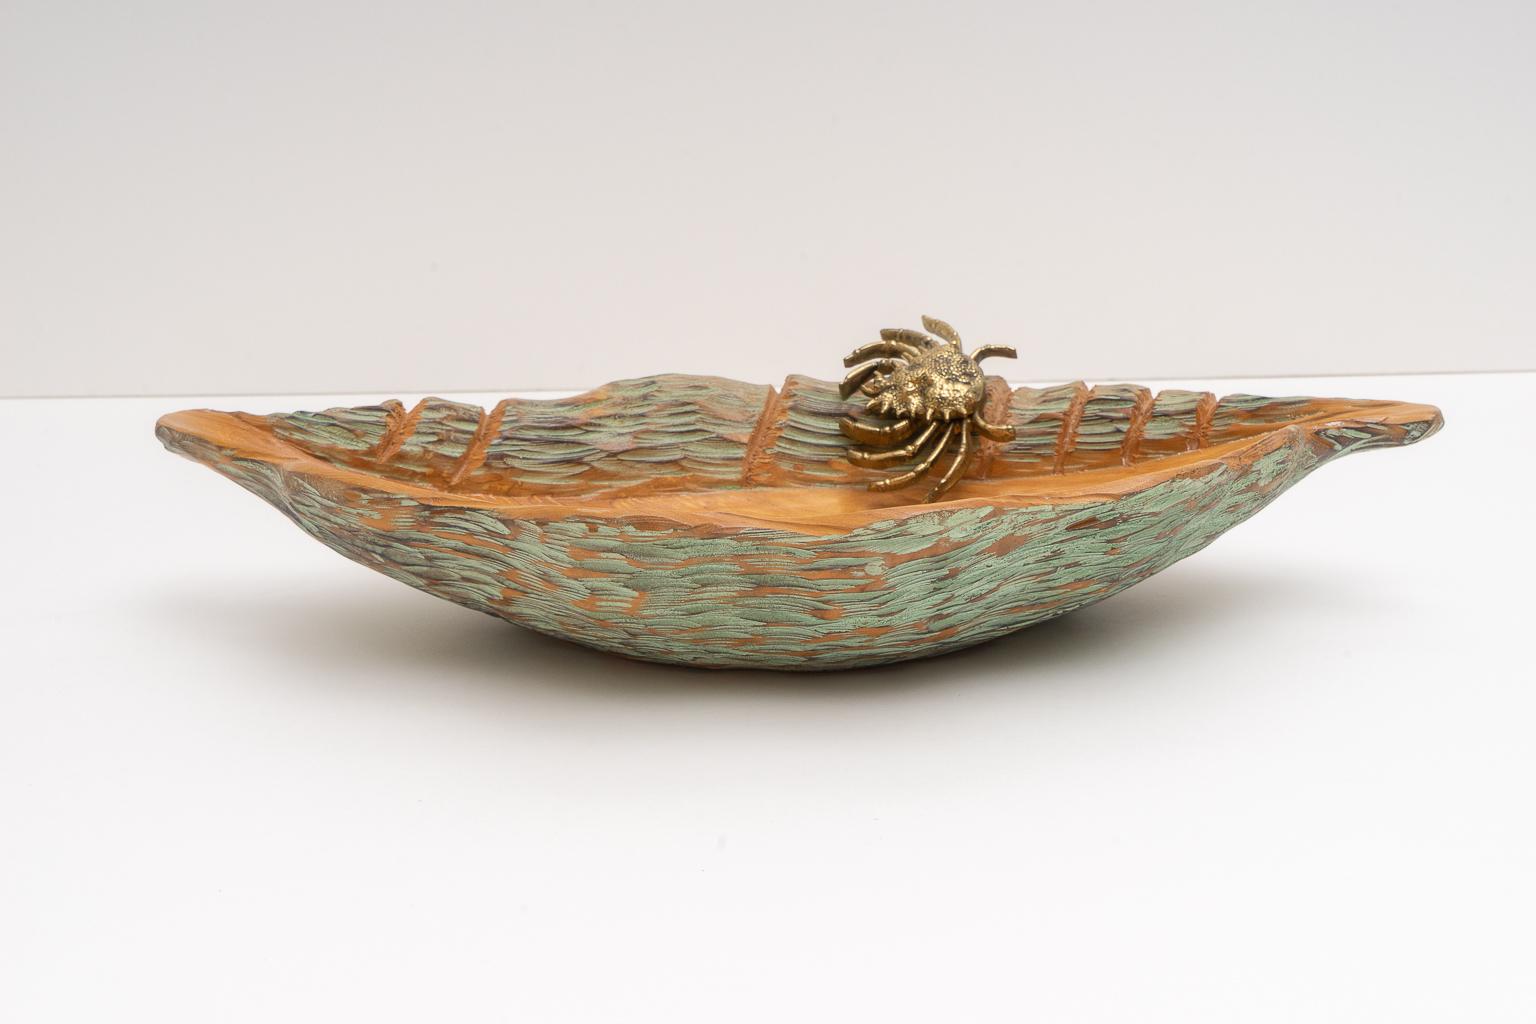 This stylish and chic serving dish is by Aldo Tura for Macabo Cusano and dates to the 1950s-1960s. The piece is handcrafted in the form of seashell with a bonze crab figure.